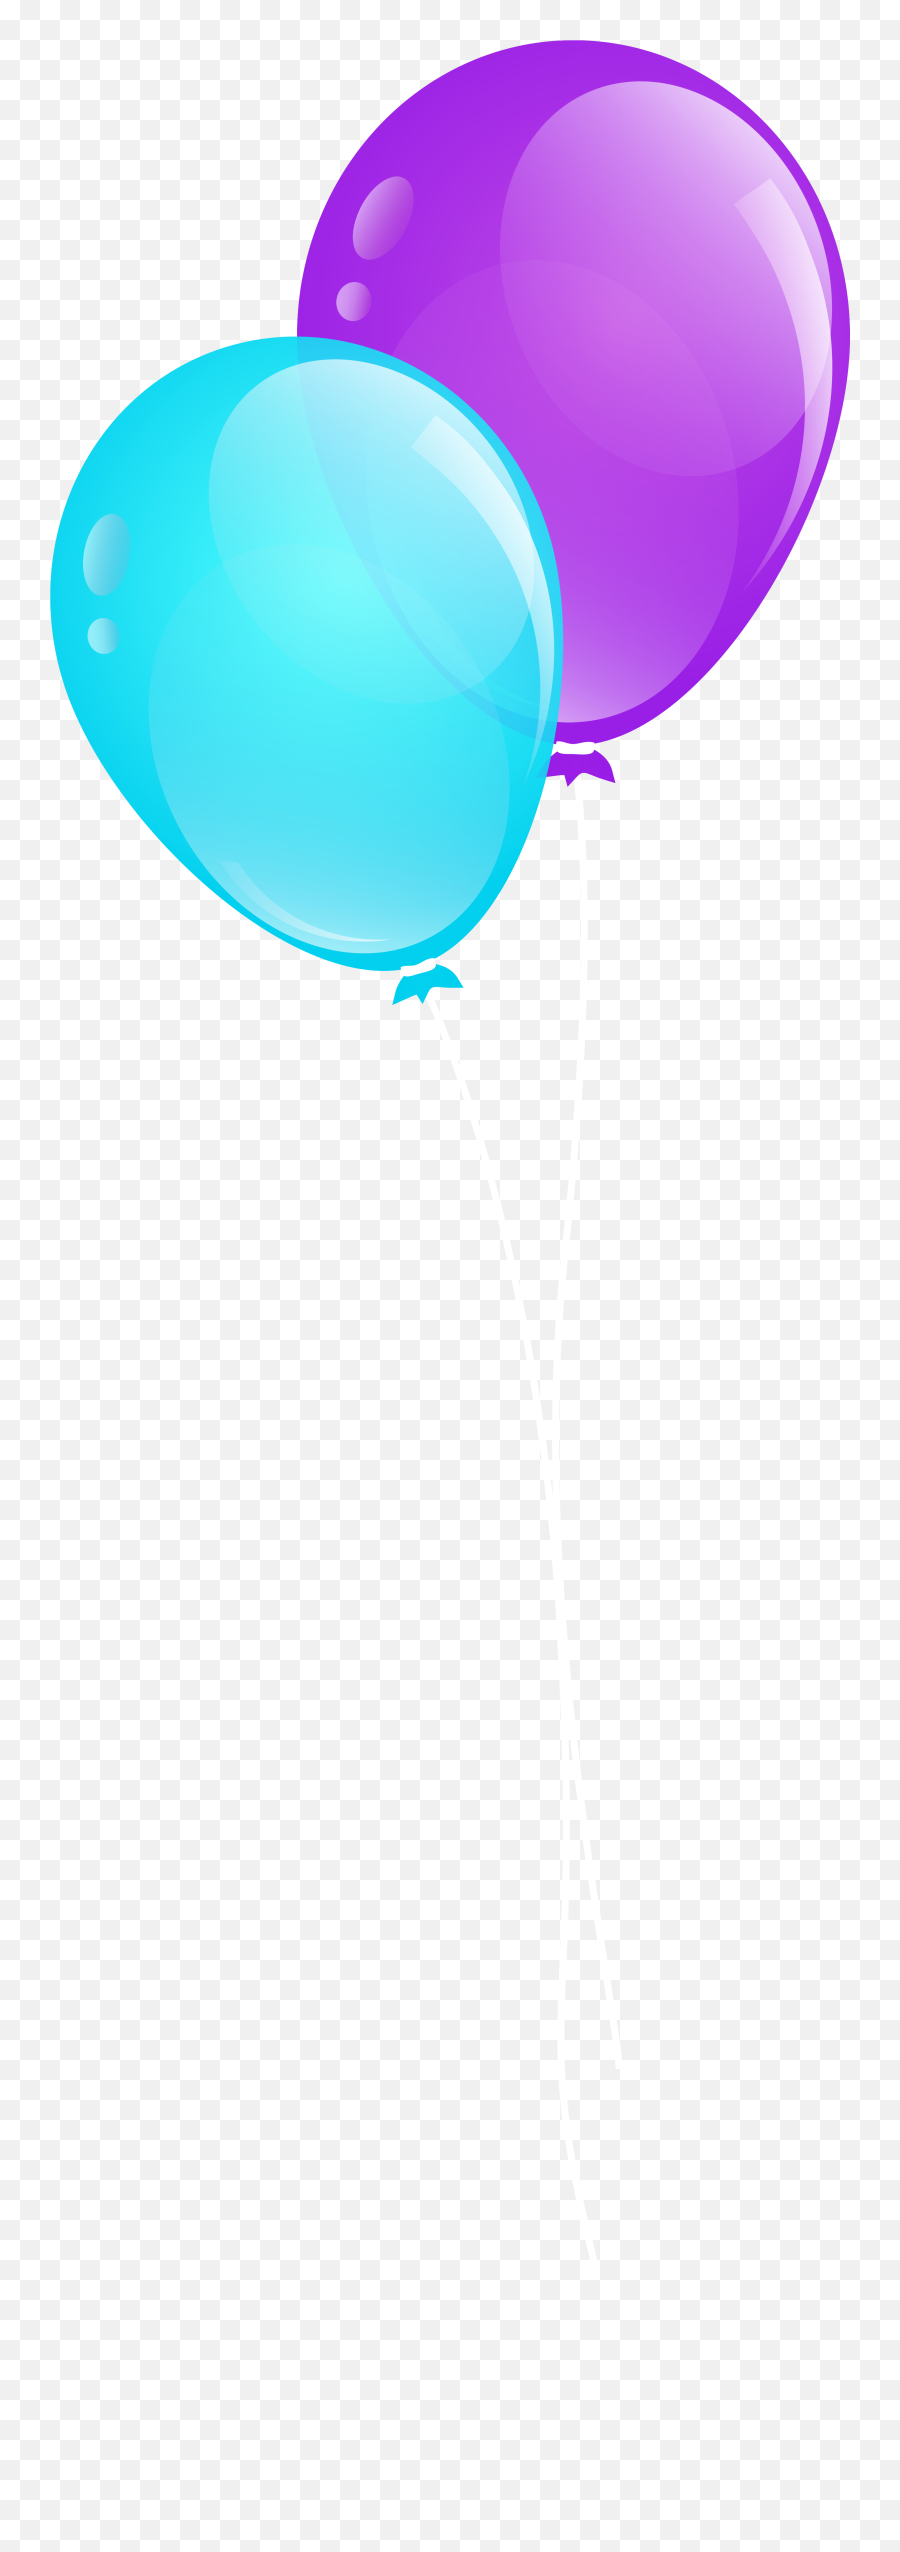 Download Hd Blue And Purple Balloons Clip Art Image - Purple Blue And Purple Balloons Png,Blue Balloons Png